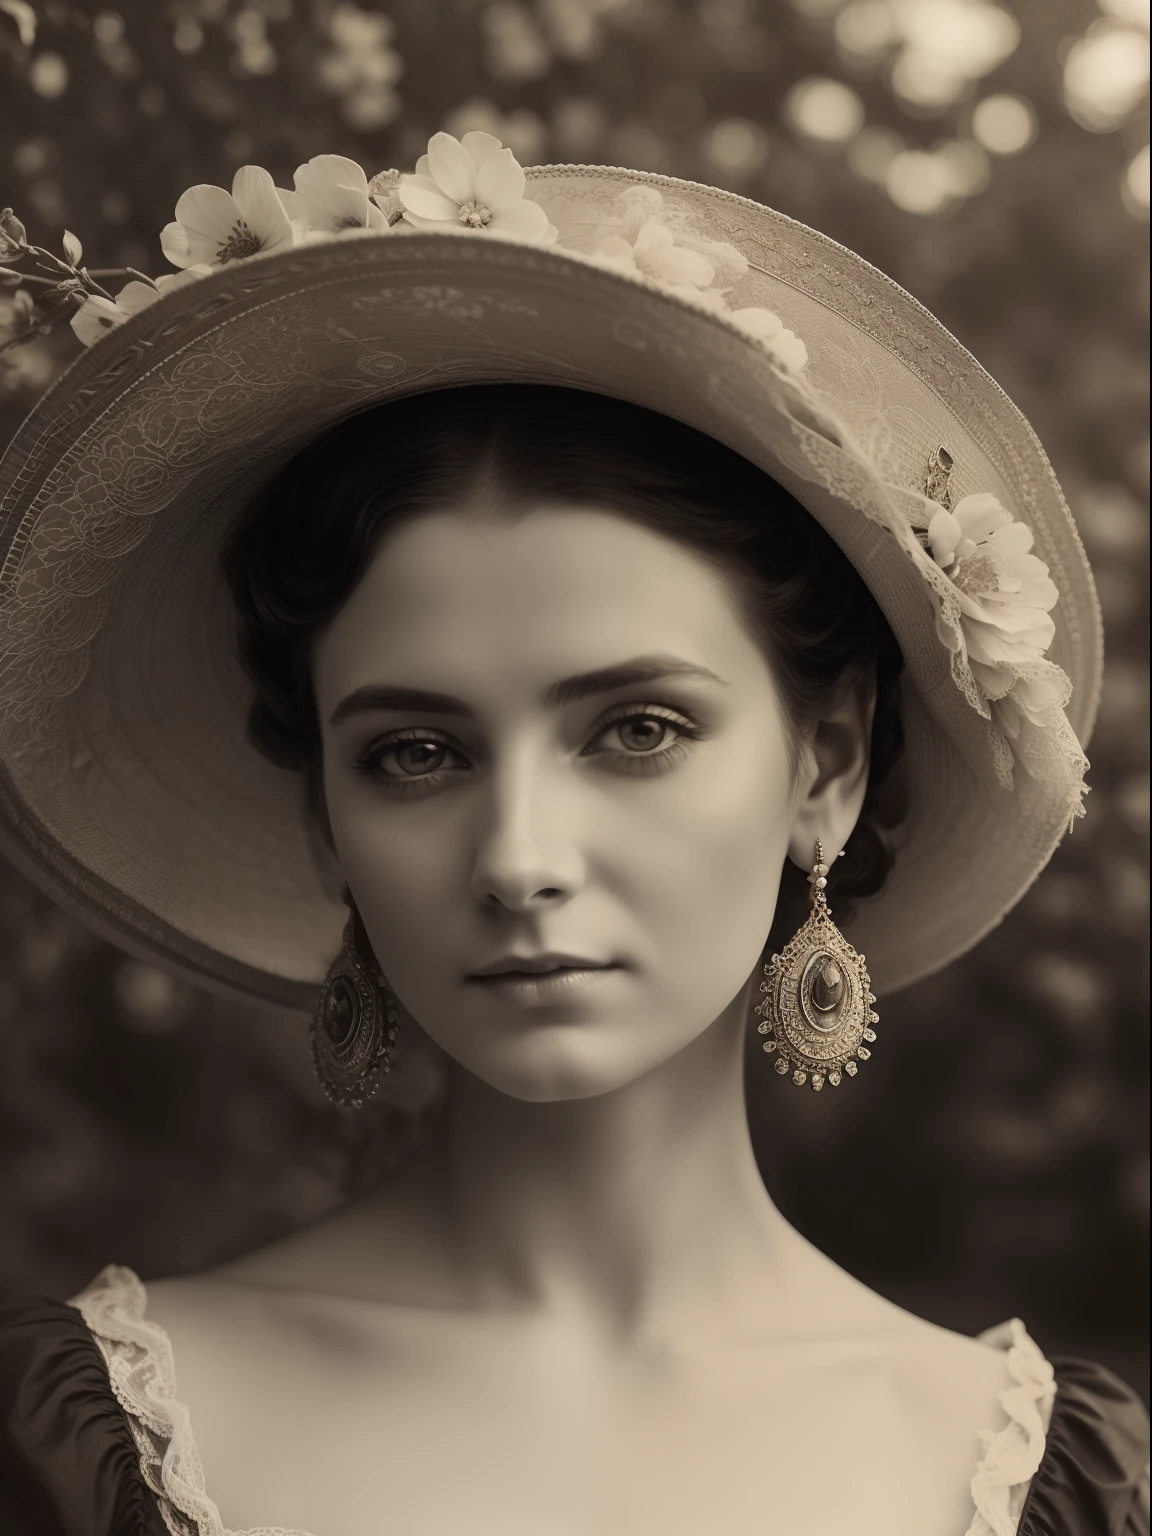 (Masterpiece) An insanely beautiful Victorian lady wearing a rich flowering over the top exaggerated hat, rich jewelry, big earrings, vintage sepia photography, outdoor photography, extremely inviting look, front look,  looking at the camera, very old and torned photo